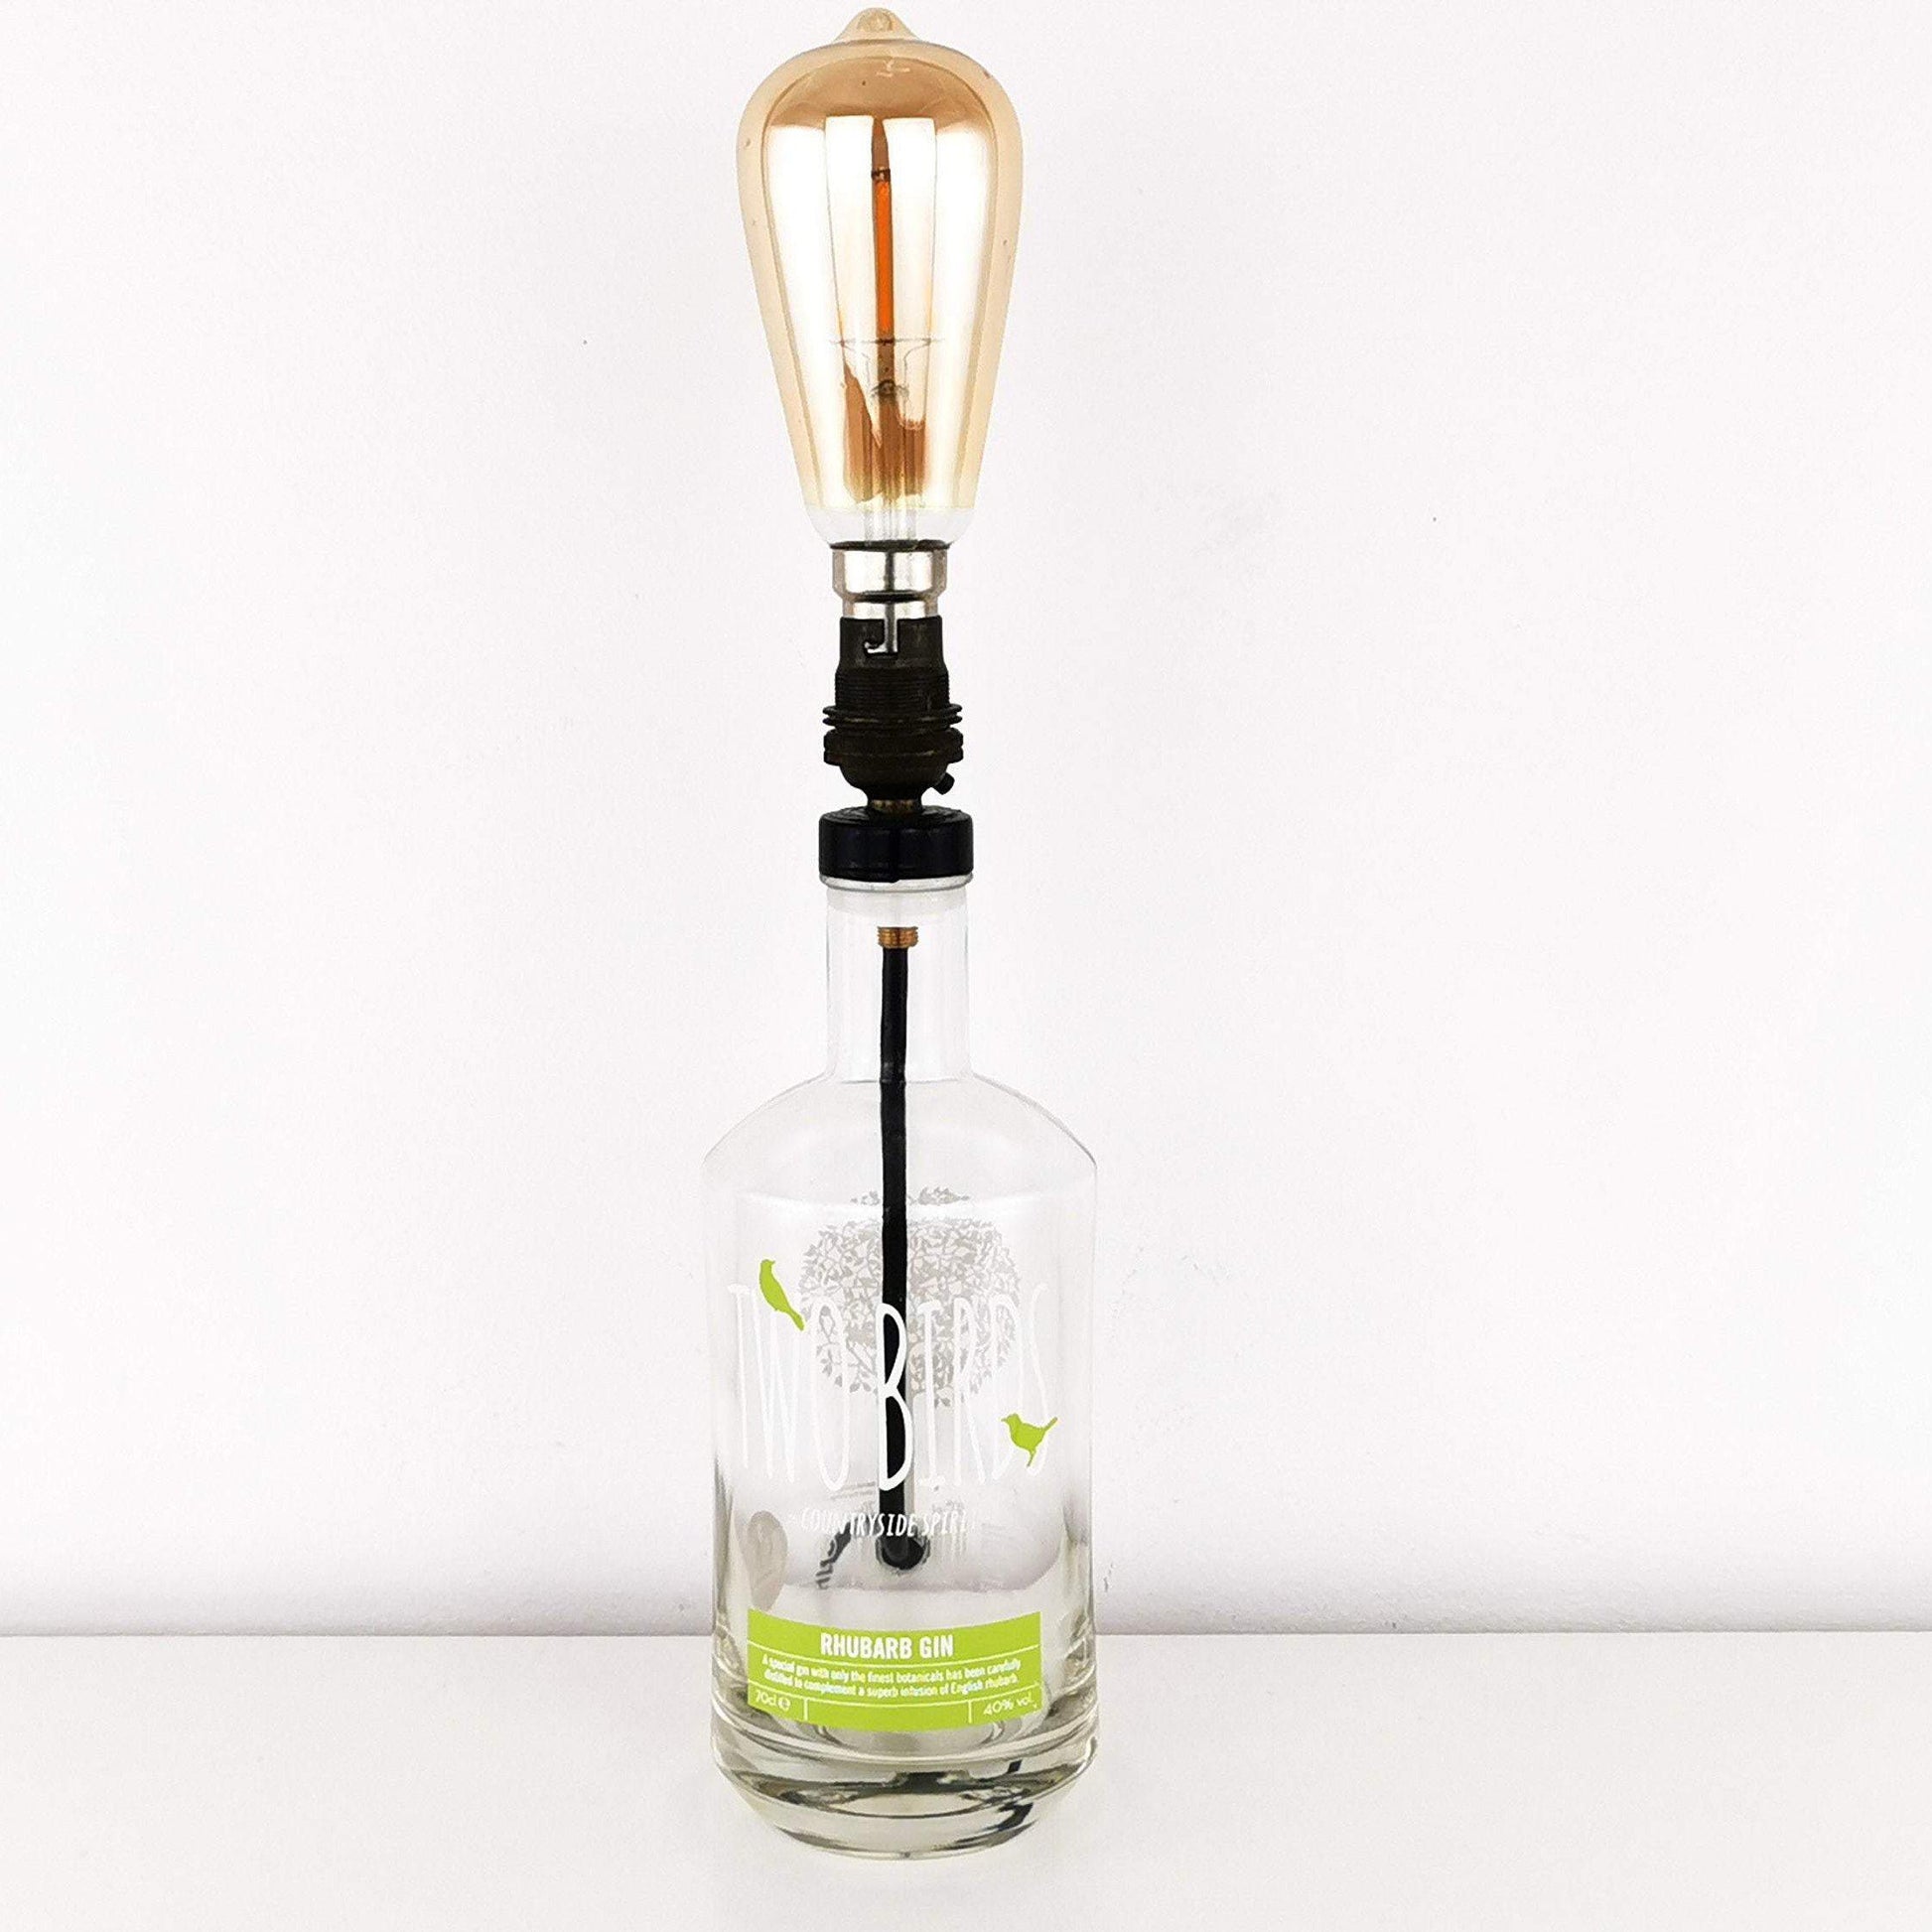 Two Birds Rhubarb Gin Bottle Table Lamp Gin Bottle Table Lamps